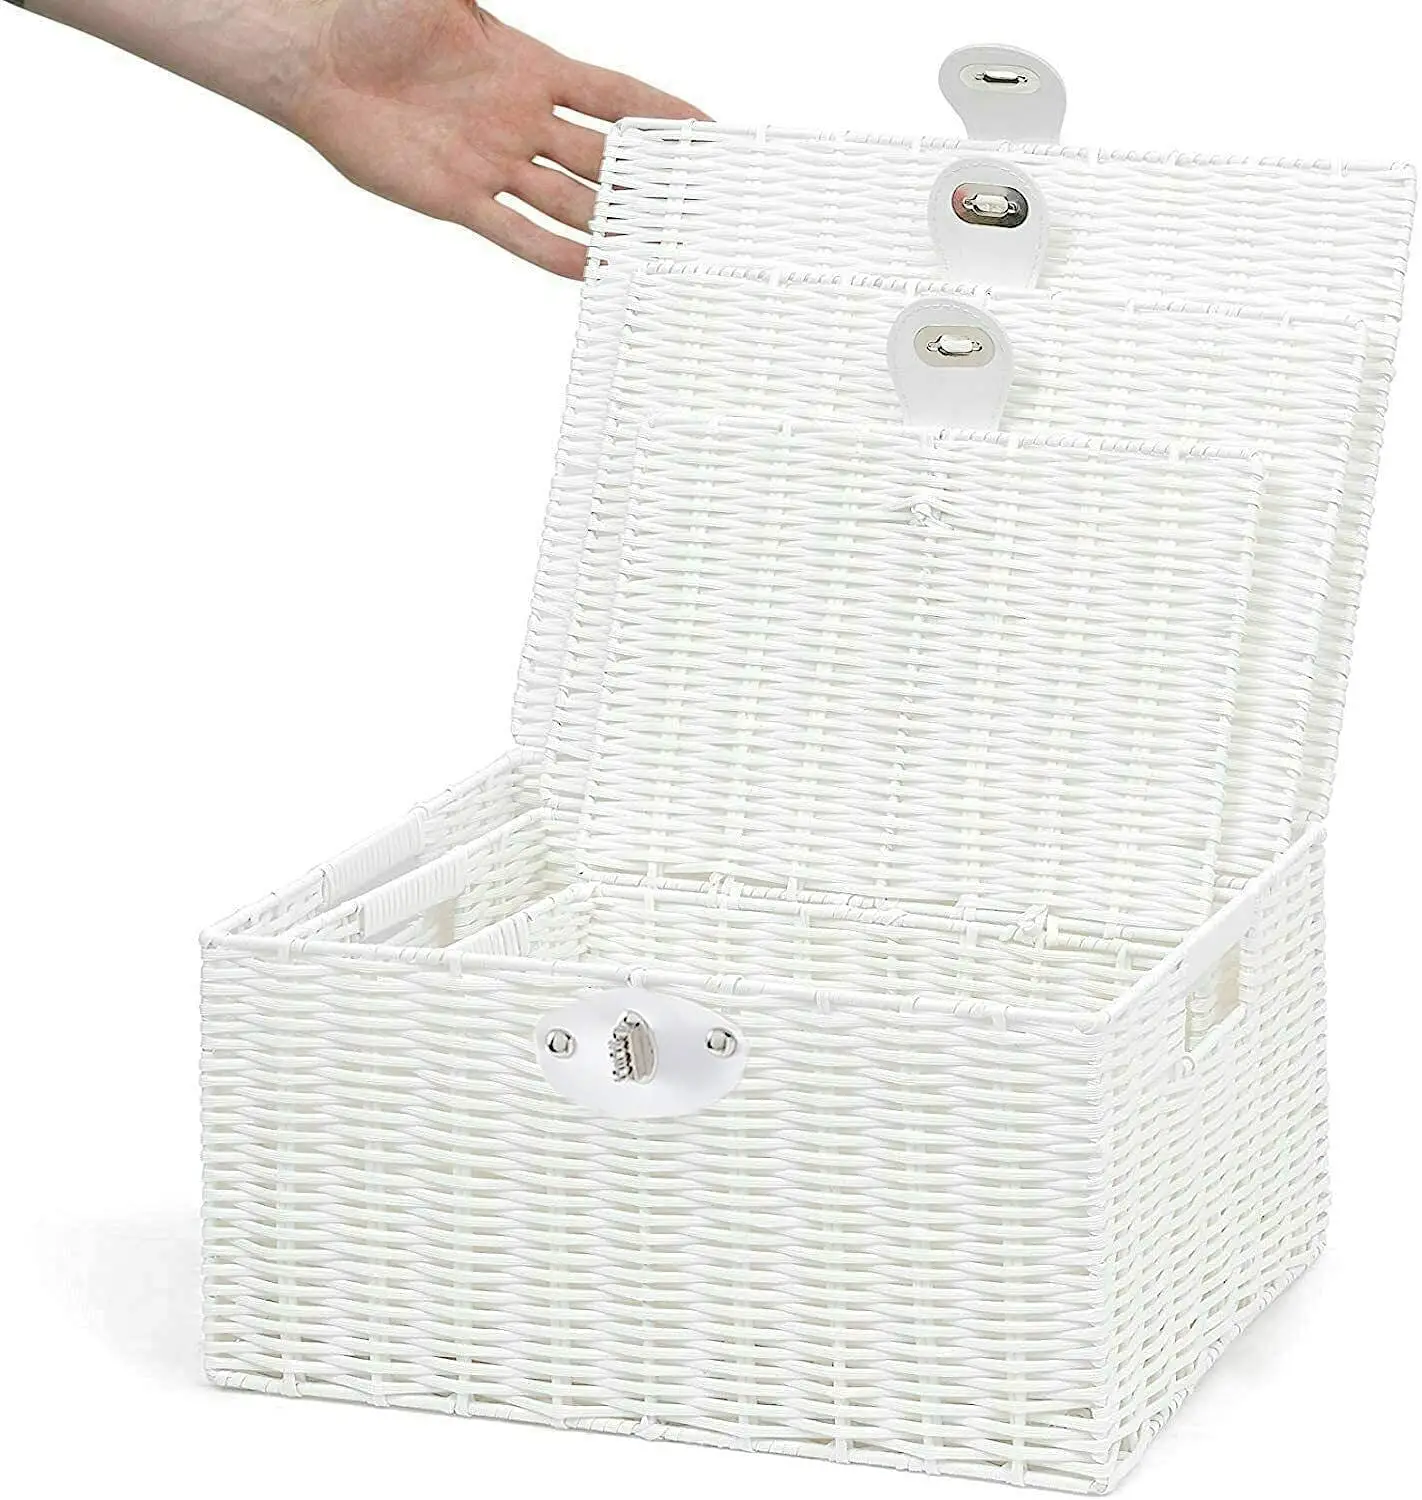 White Woven Storage Baskets - Decorative Nesting Boxes with Lids and Locks, Storage Box Hamper Organizer for Home